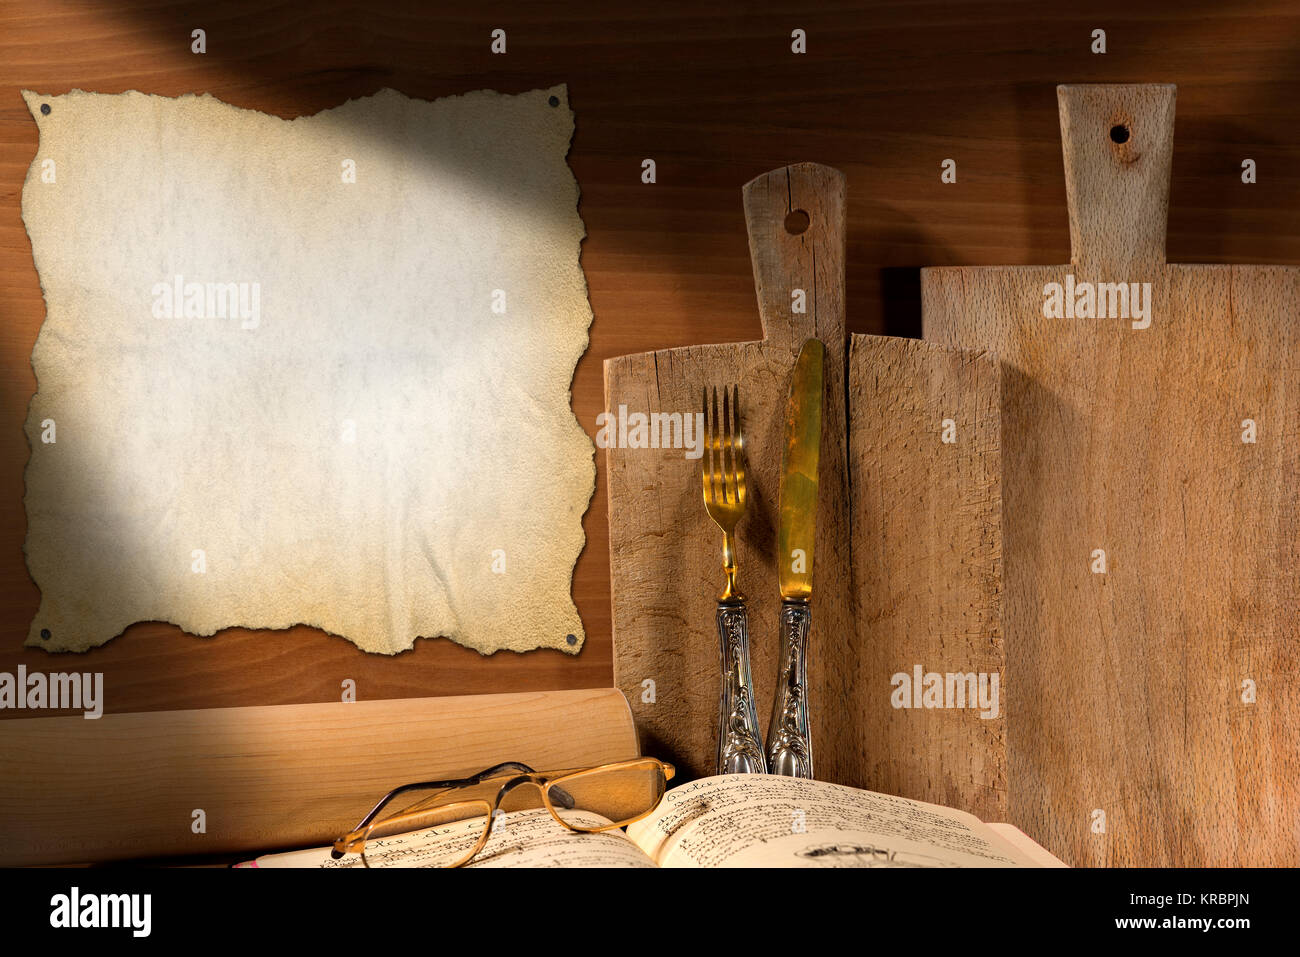 Wooden wall with cutting boards, silverware, recipe book, glasses, rolling pin and empty parchment. Concept of rustic cuisine Stock Photo